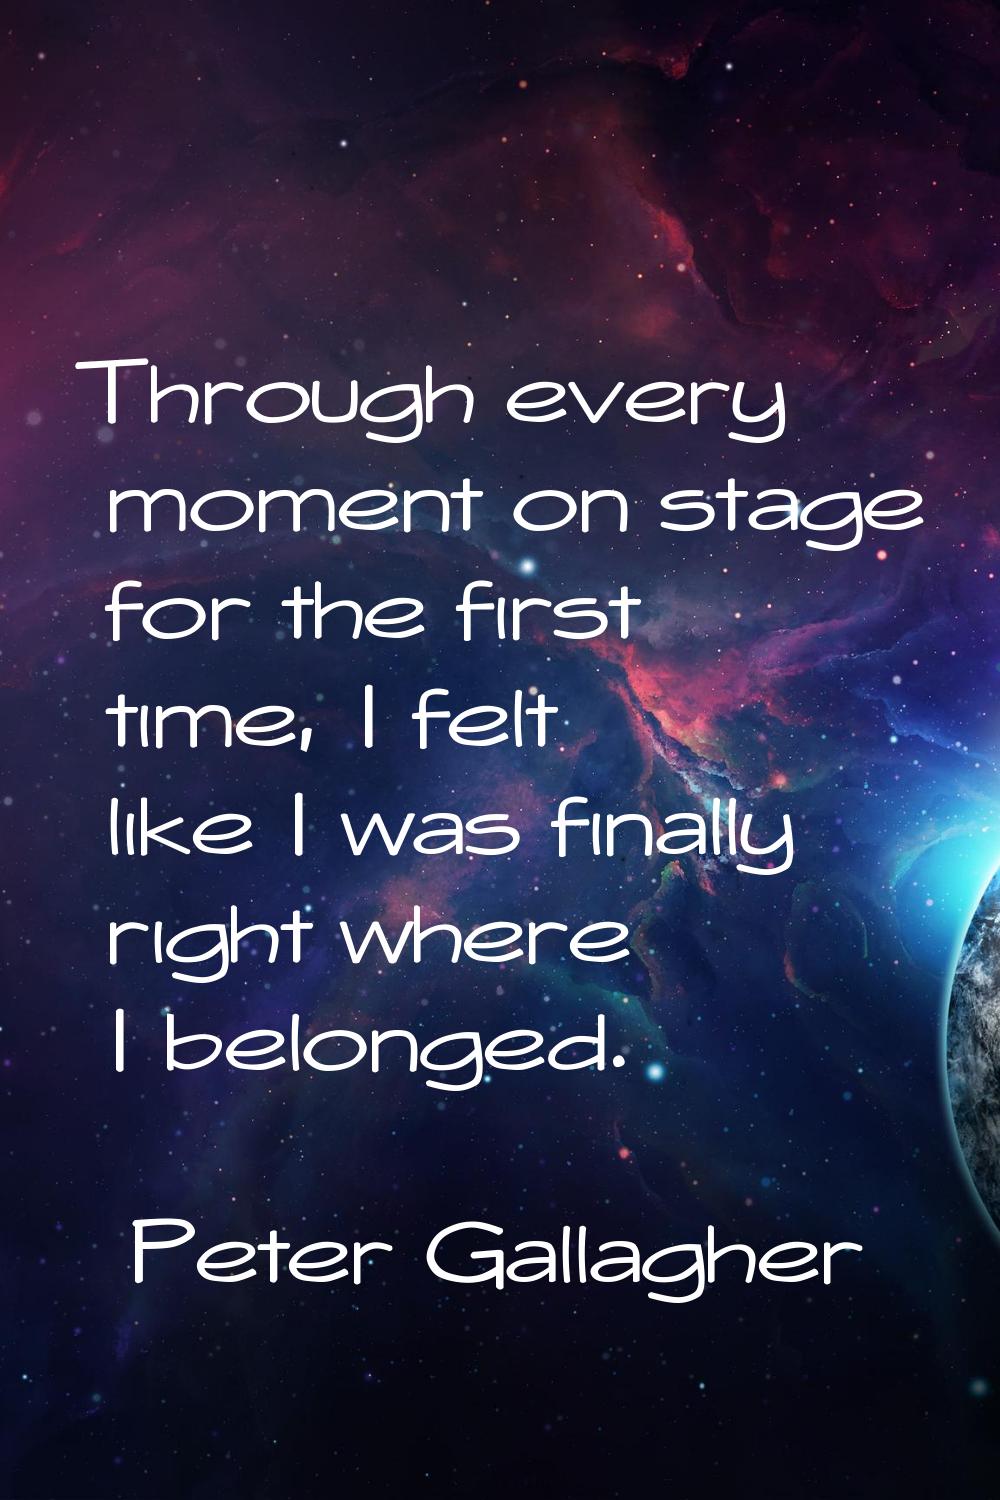 Through every moment on stage for the first time, I felt like I was finally right where I belonged.